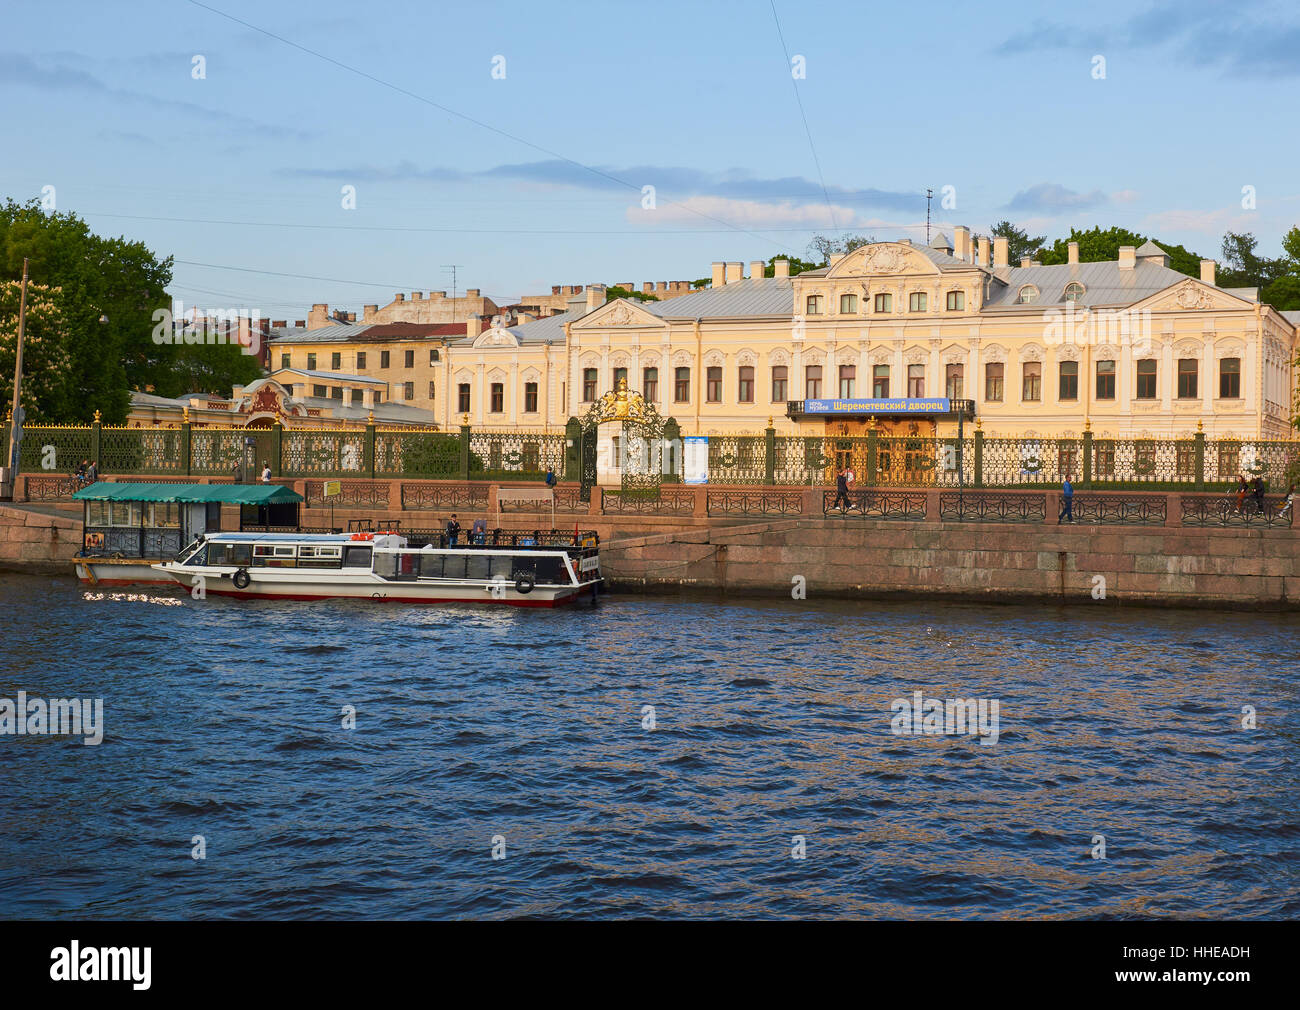 Baroque Sheremetev Palace on the Fontanka River St Petersburg Russia Formerly a private residence today it's a museum dedicated to musical instruments Stock Photo